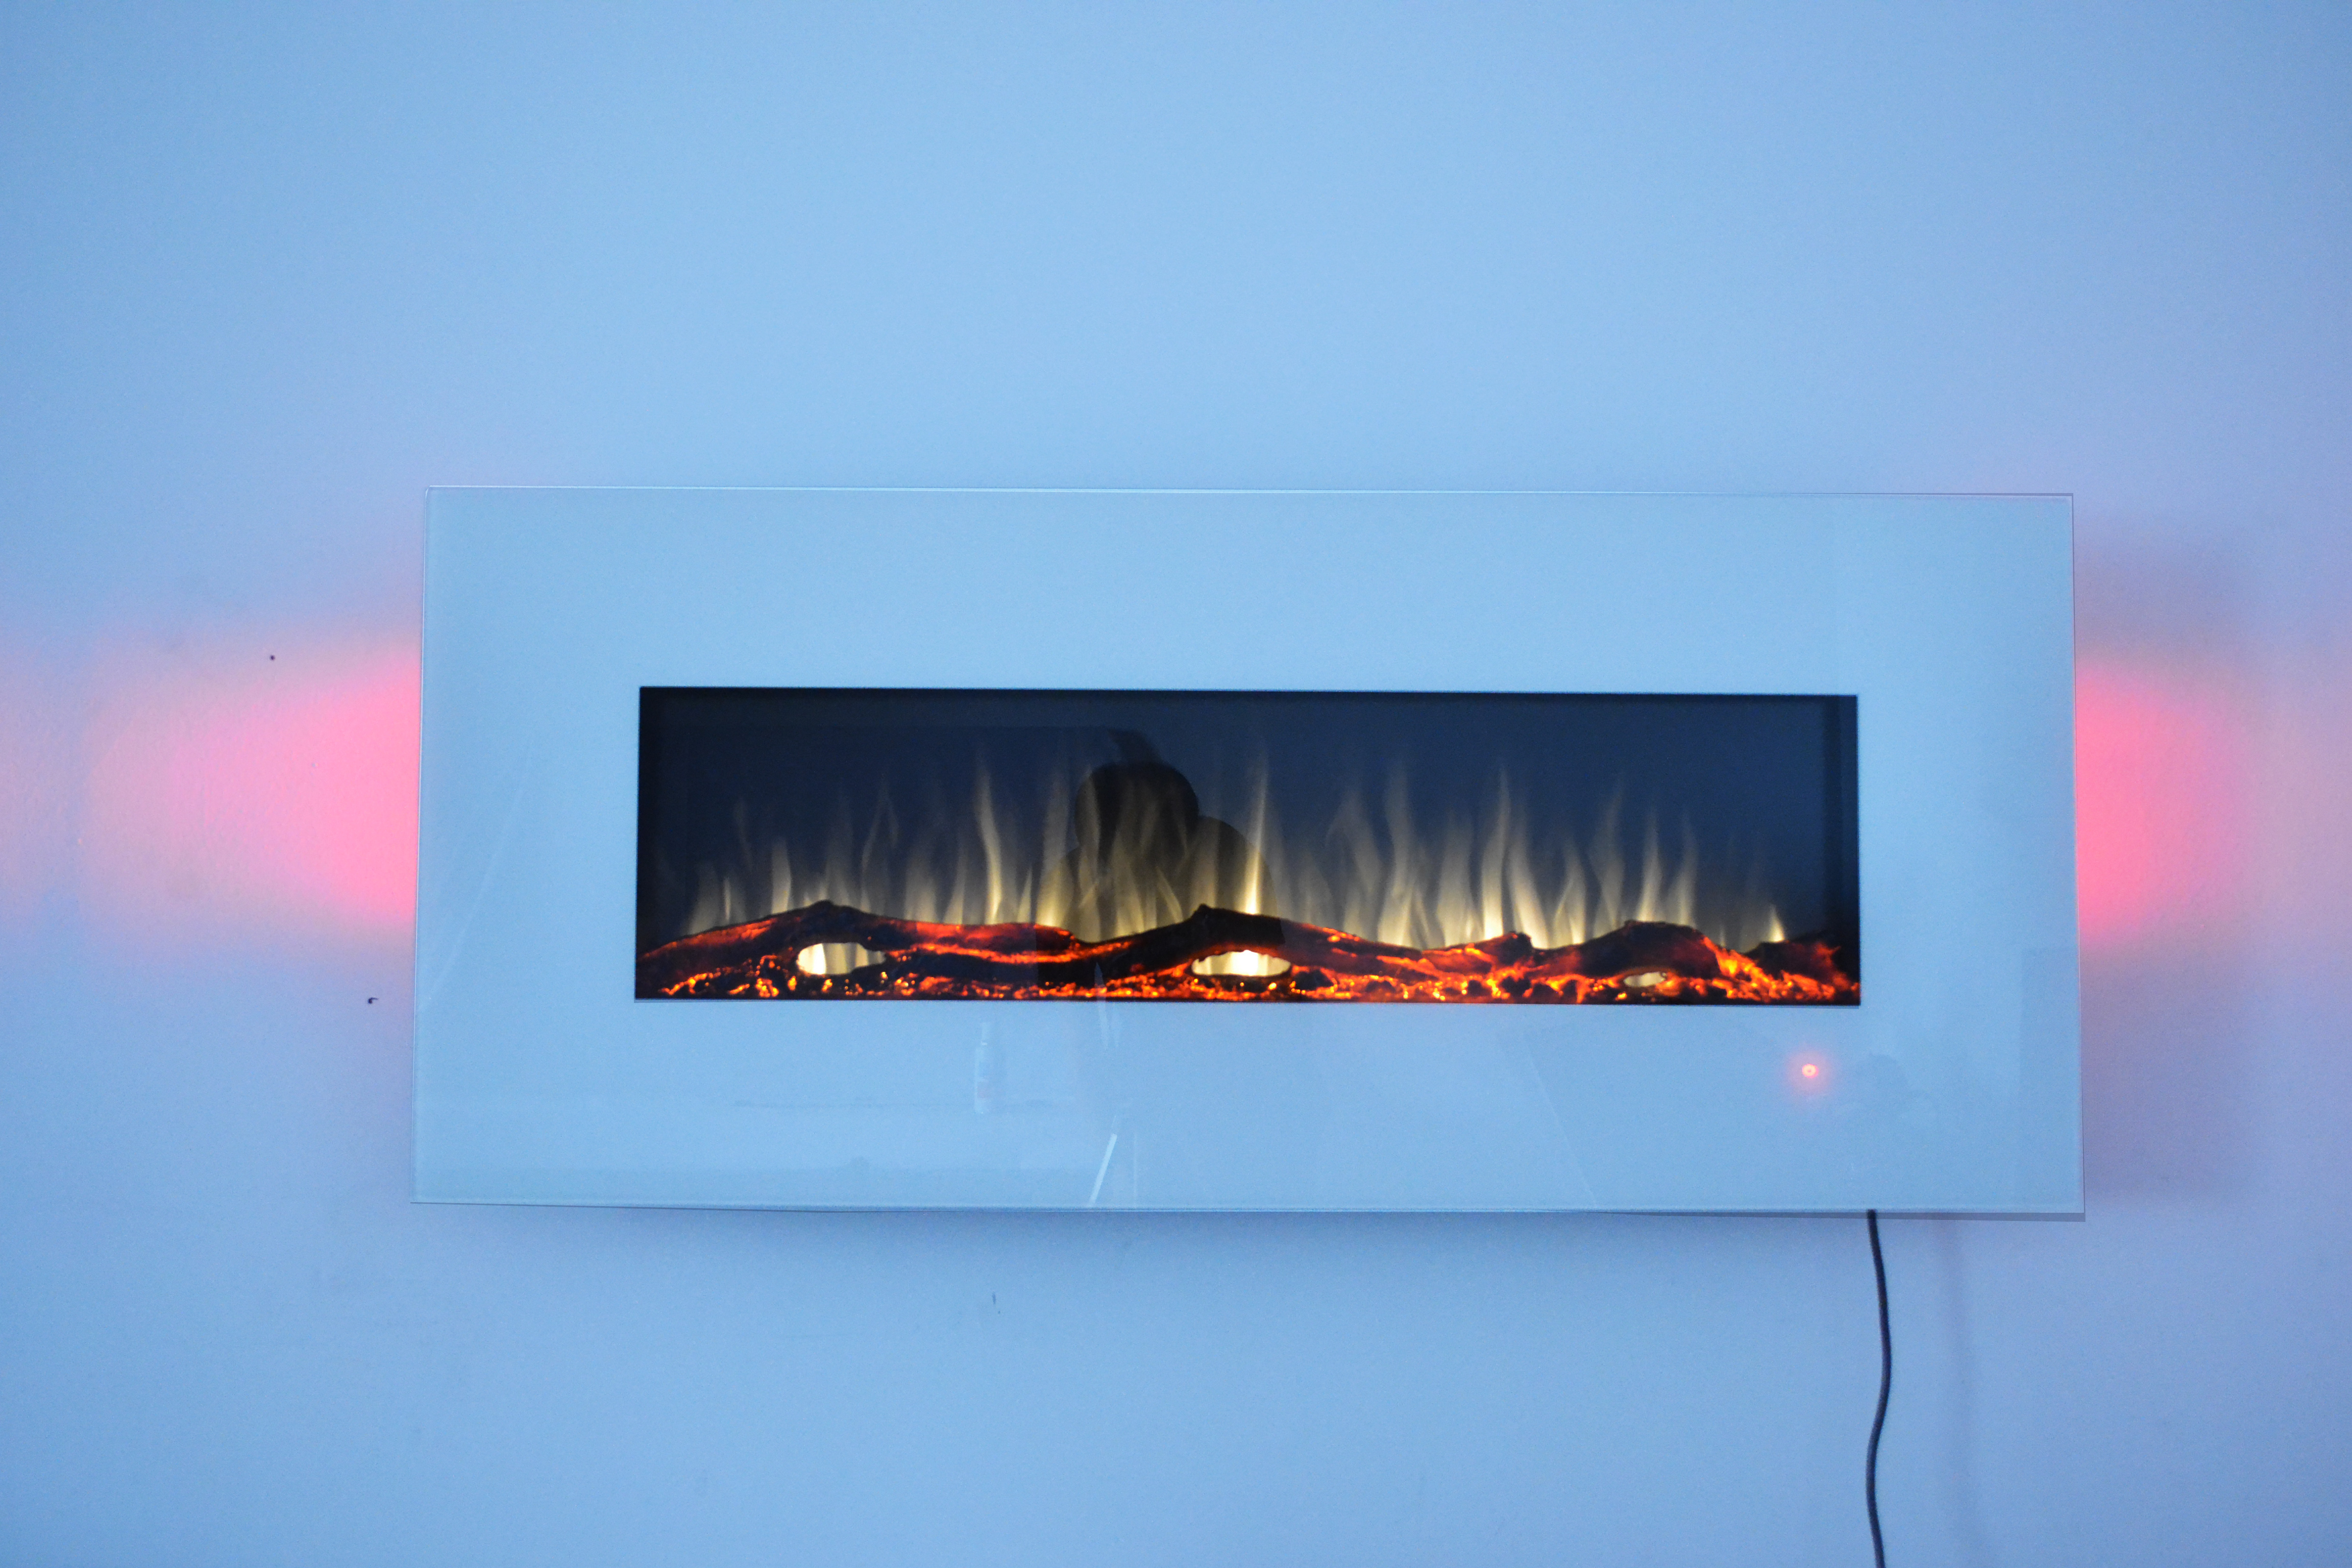 50 inch large wall mounted electric fire with orange flames and log effect